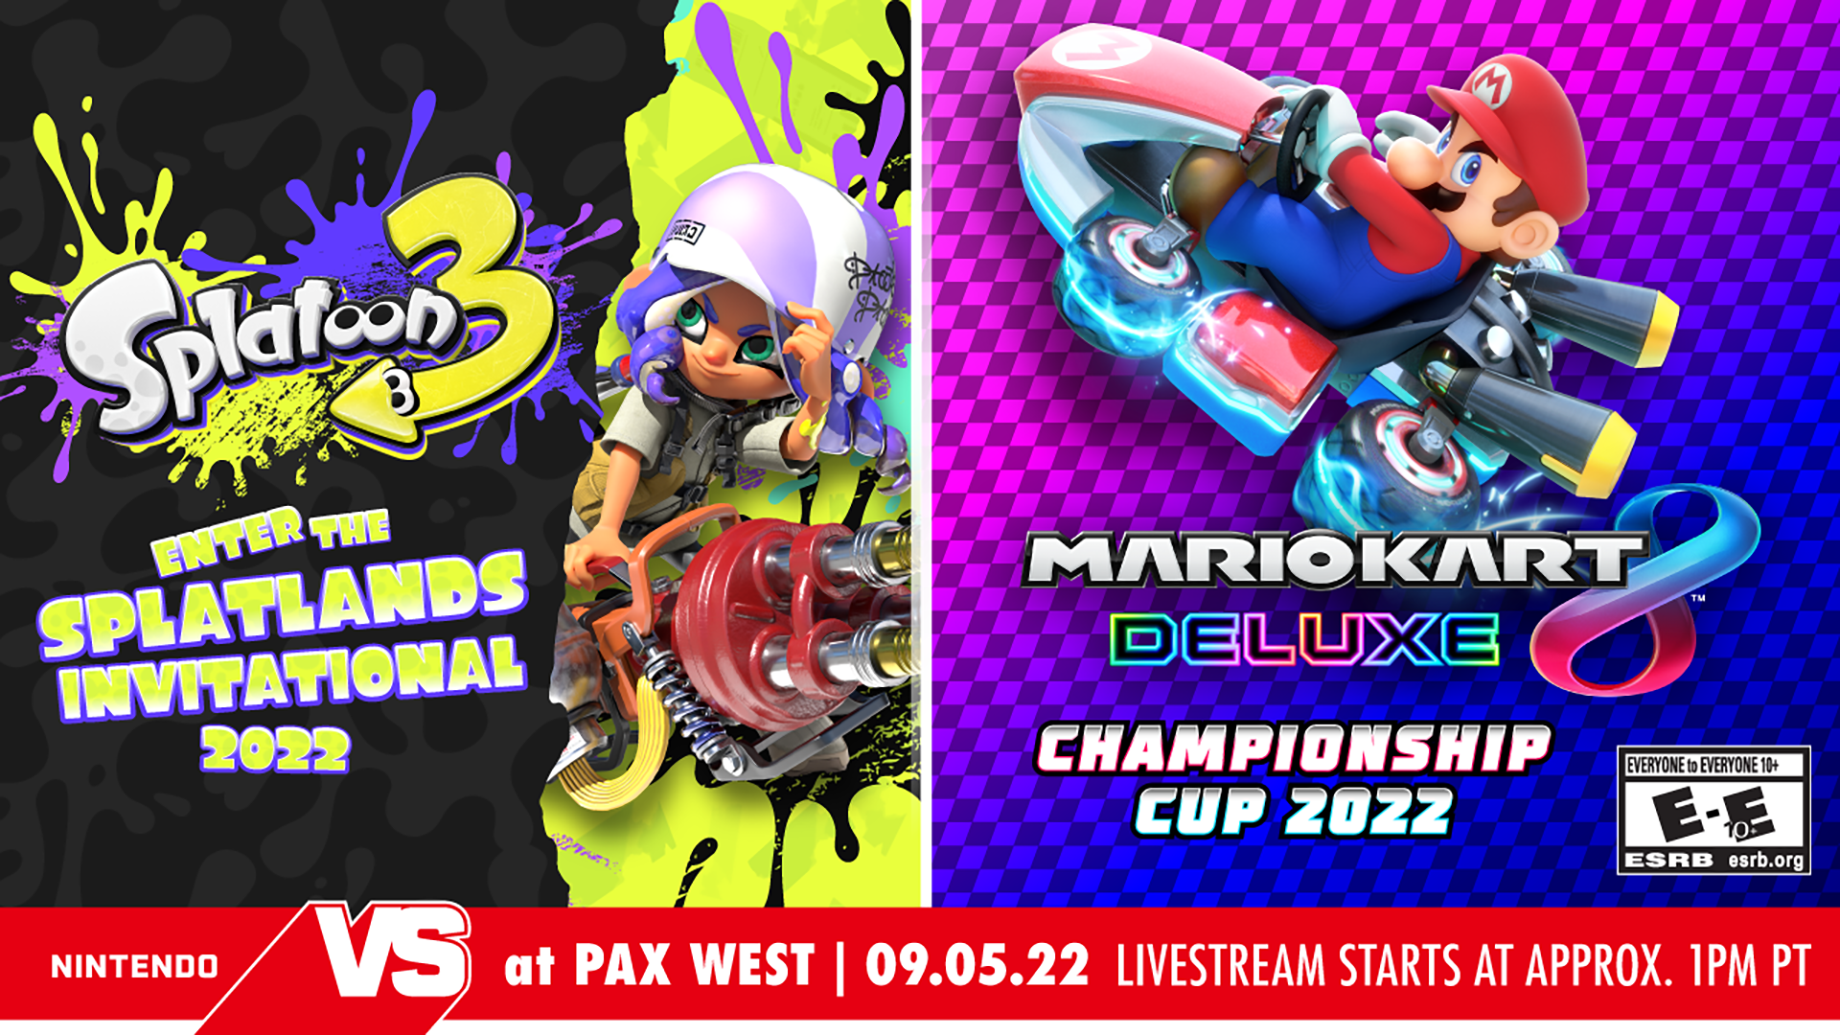 Watch the colorful chaos of two competitions unfold in the PAX Arena on September 5, 2022!